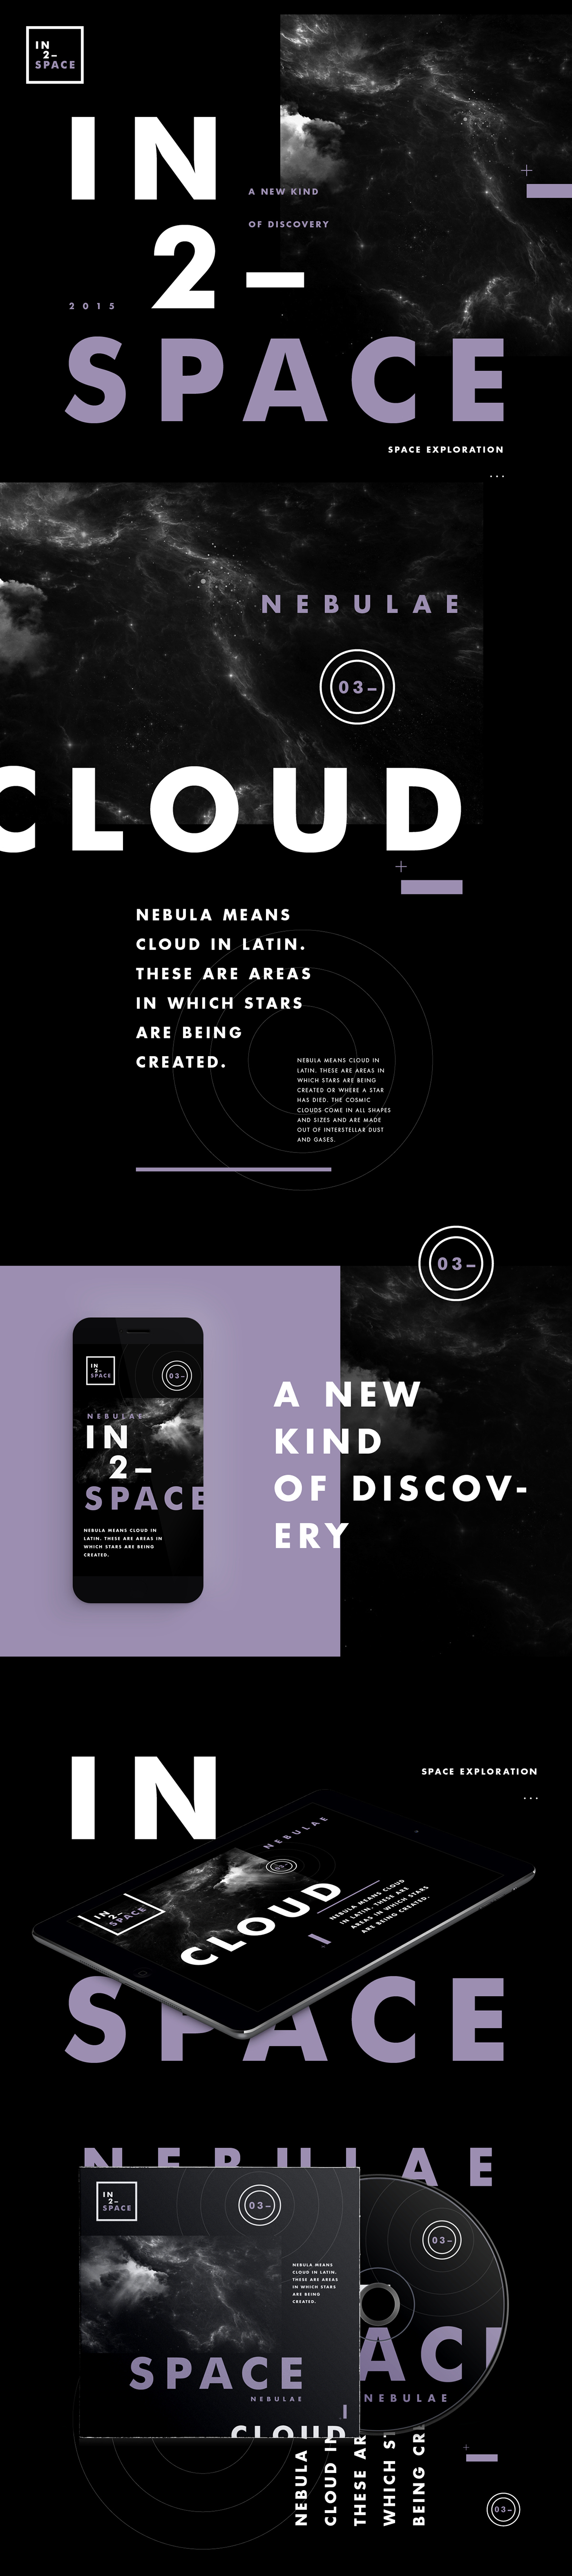 Interface mobile Web planet Space  brand logo identity color clean swiss usa astronaut Comet